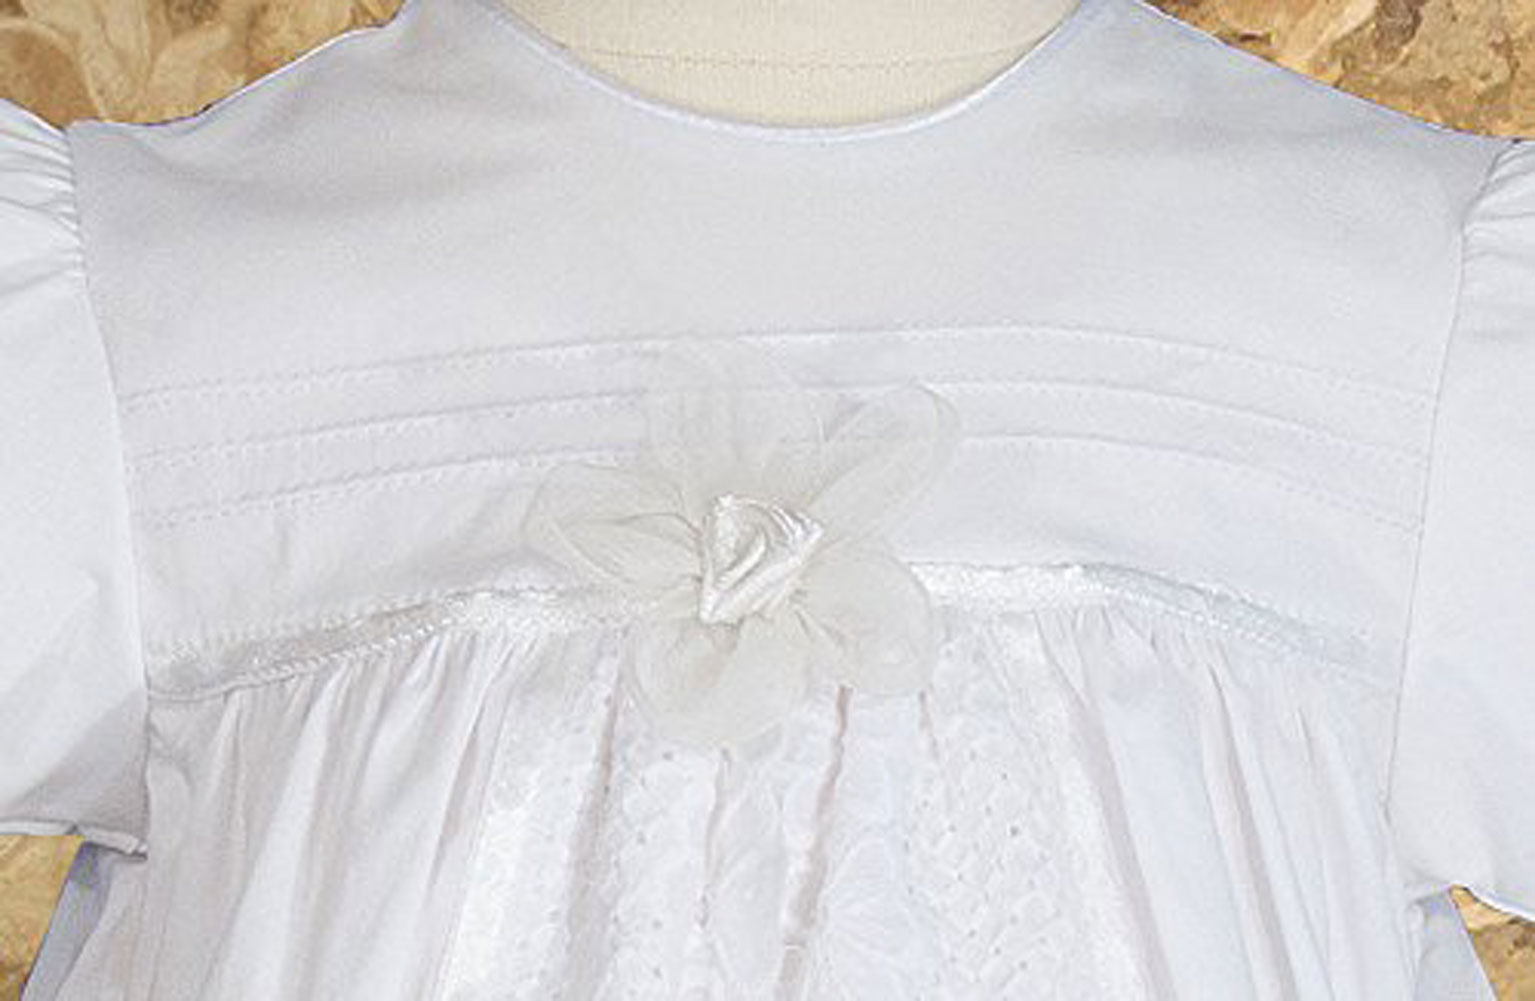 Girls 25" Split Panel Cotton Dress Christening Gown Baptism Gown - Little Things Mean a Lot